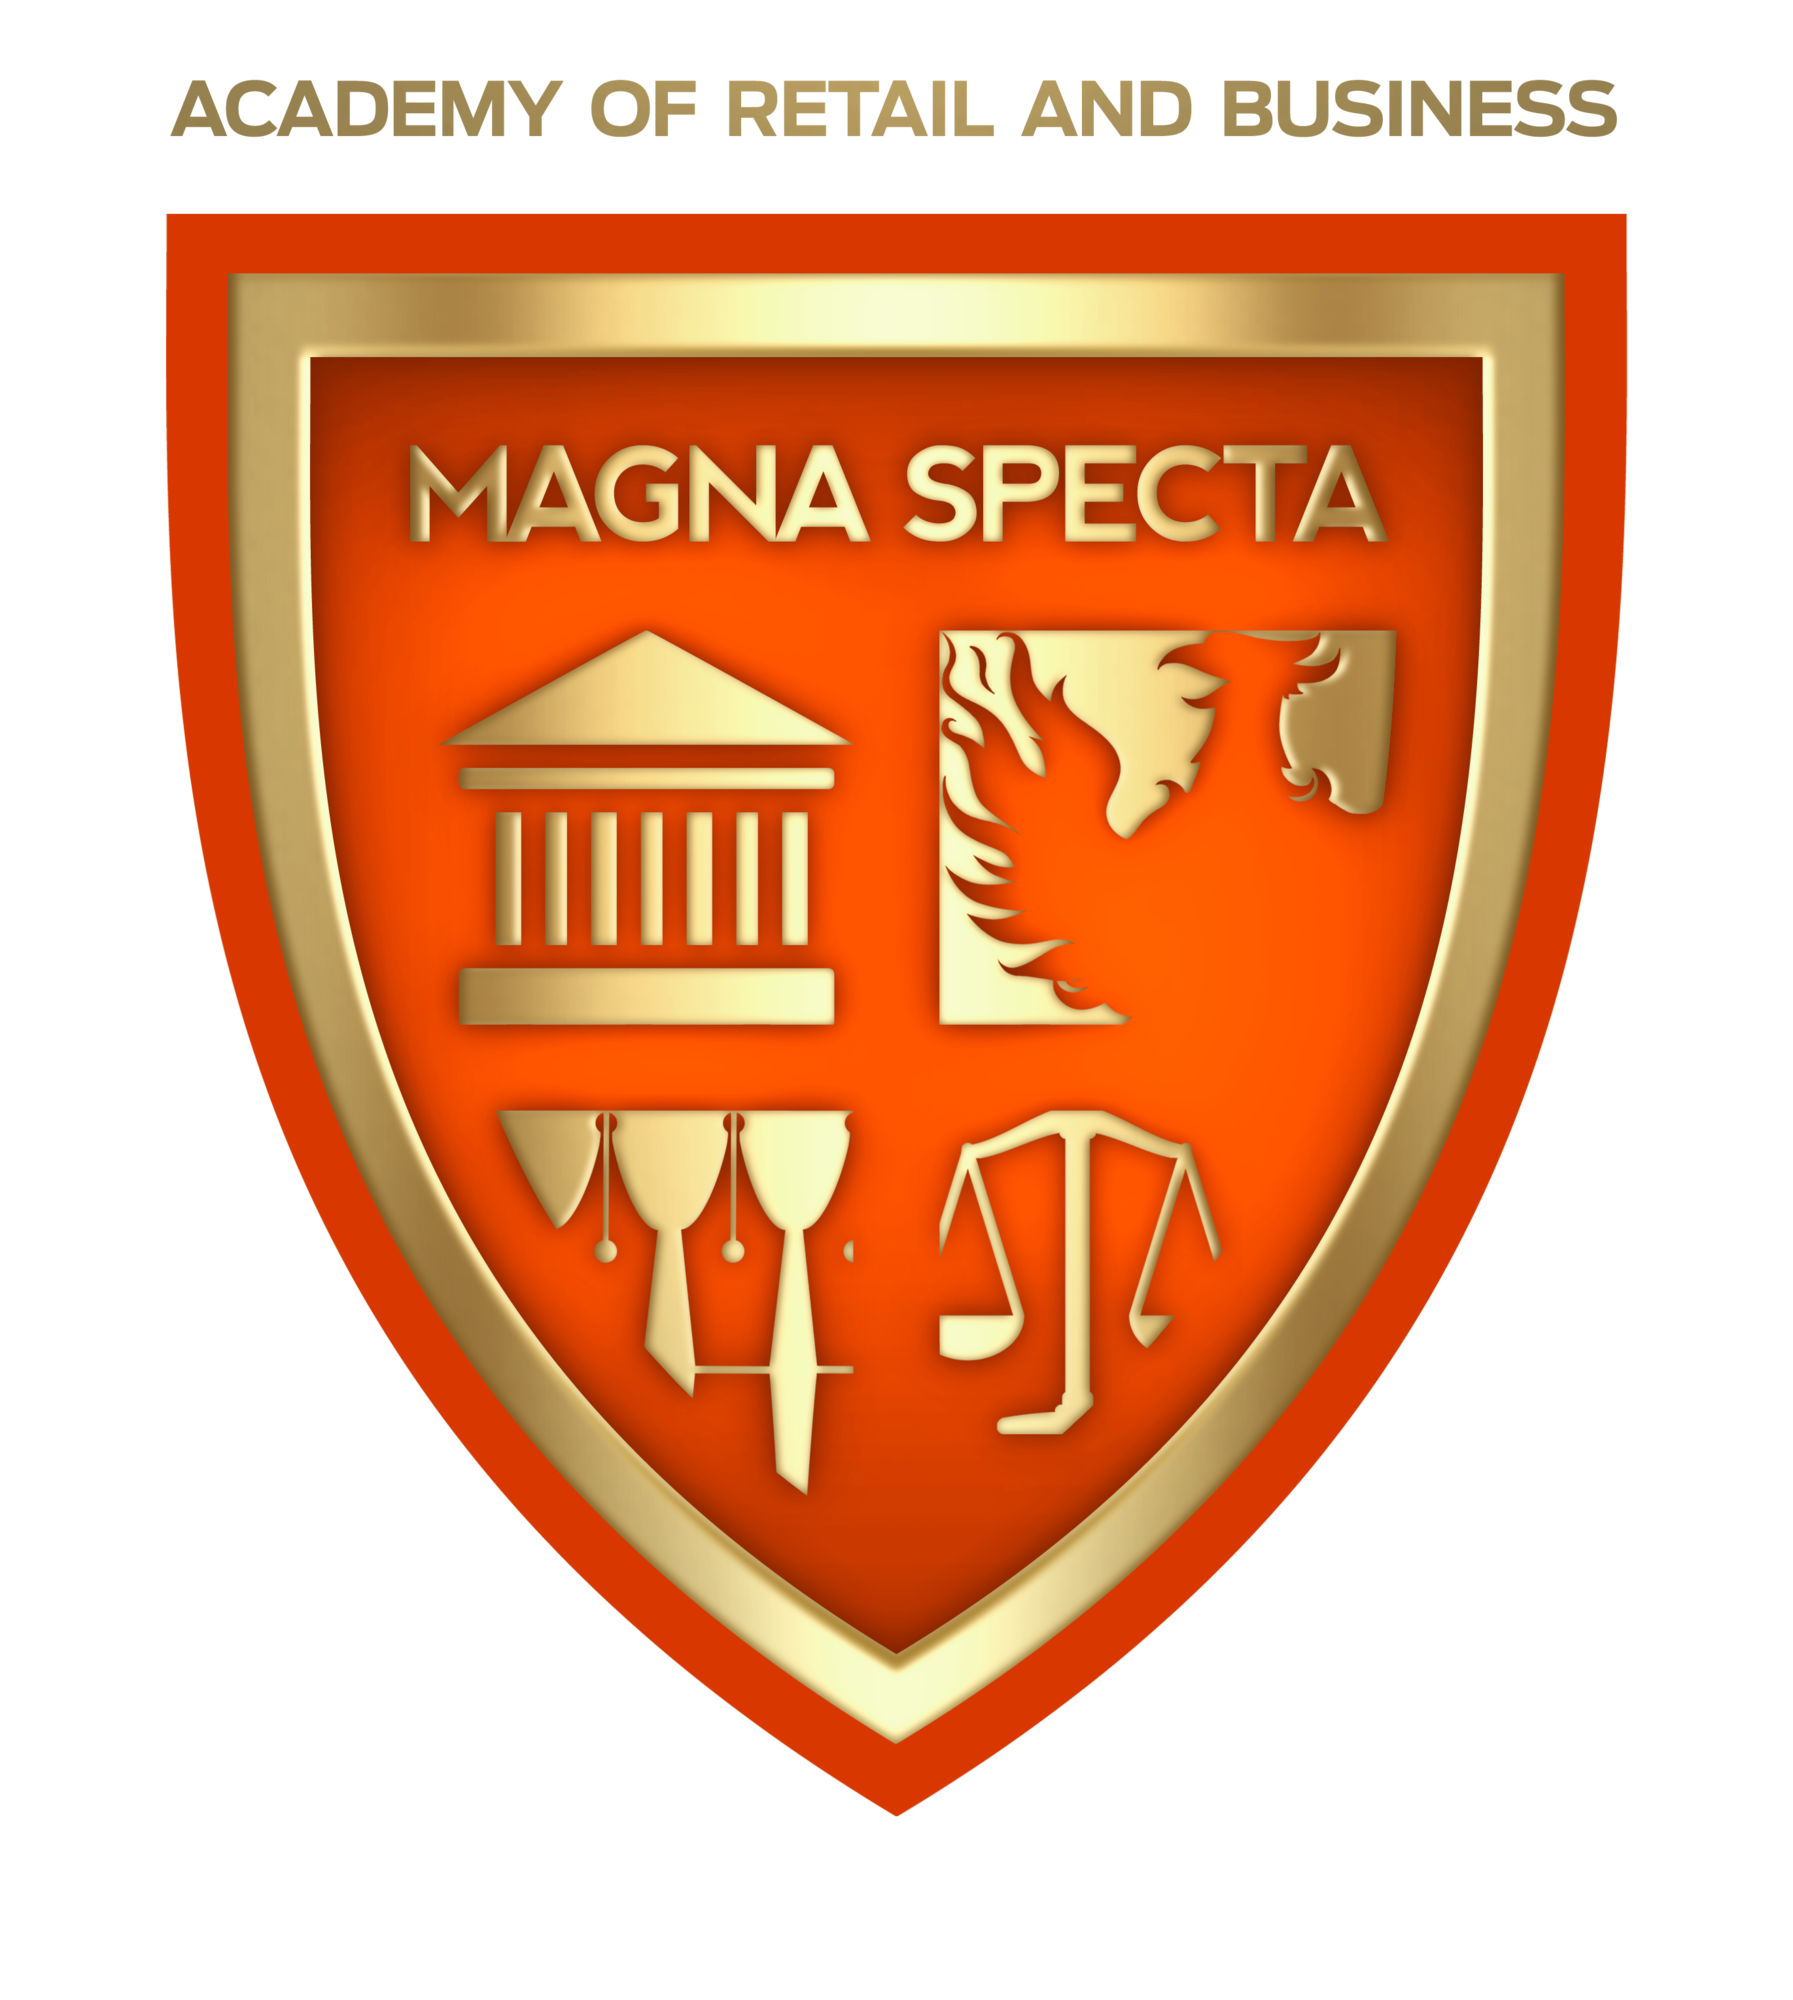 ACADEMY OF RETAIL AND BUSINESS MAGNA SPECTA